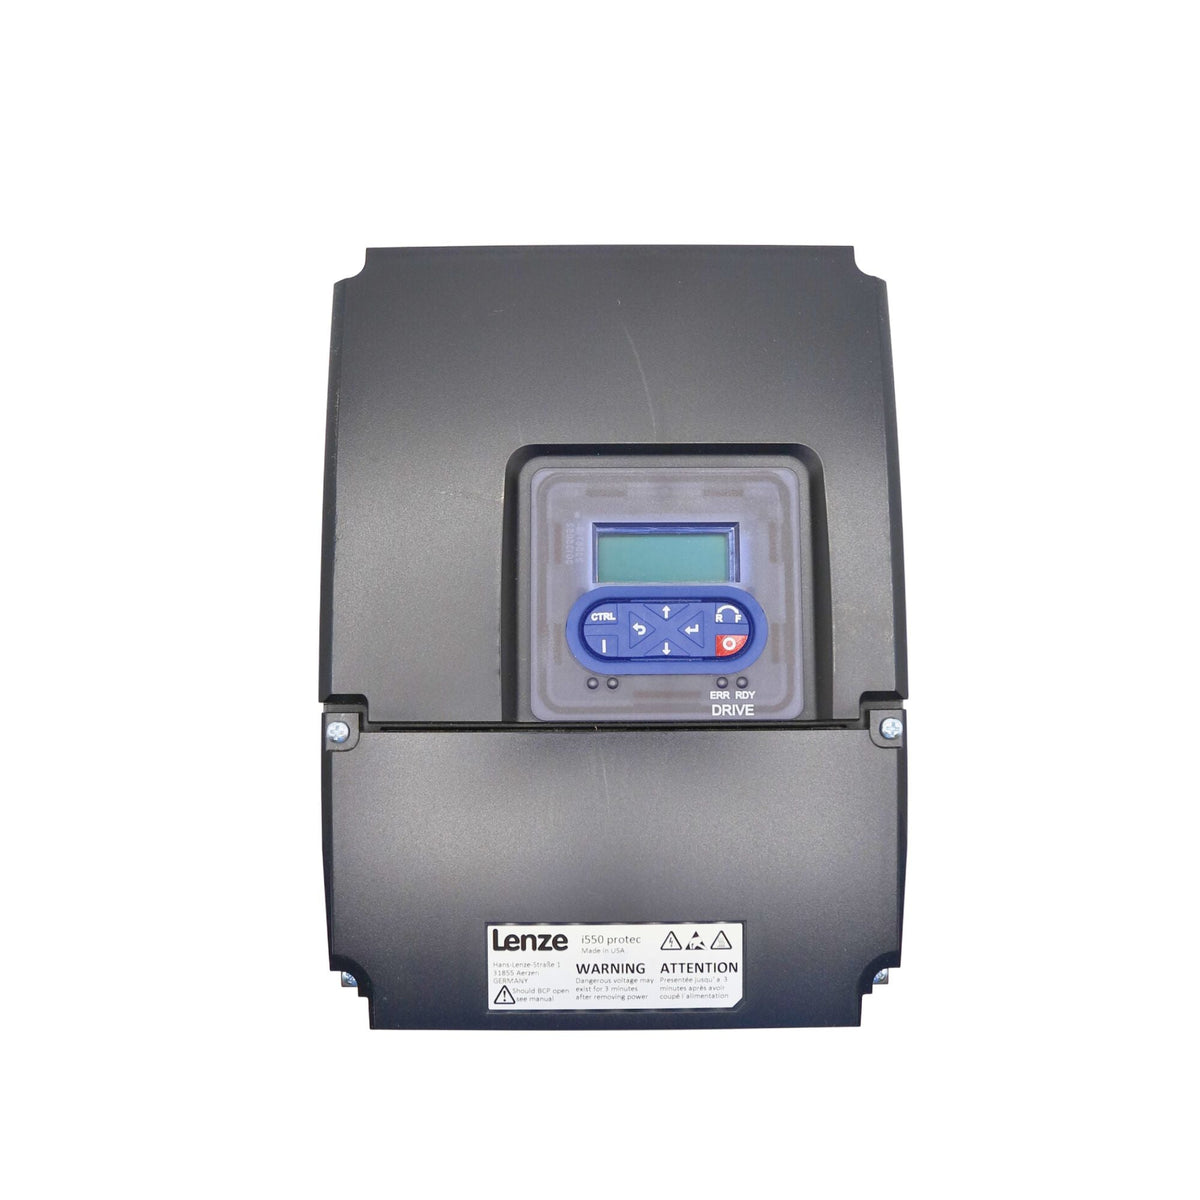 Lenze | I550 Protec 5hp Wall Mount, Nema 4x rated, Keypad, Incremental encoder (HTL) via two digital inputs, 5digital inputs, 2 analog inputs, 1 digital output 1 analog Output, 1 relay | I55AP240F00711K00S - front view